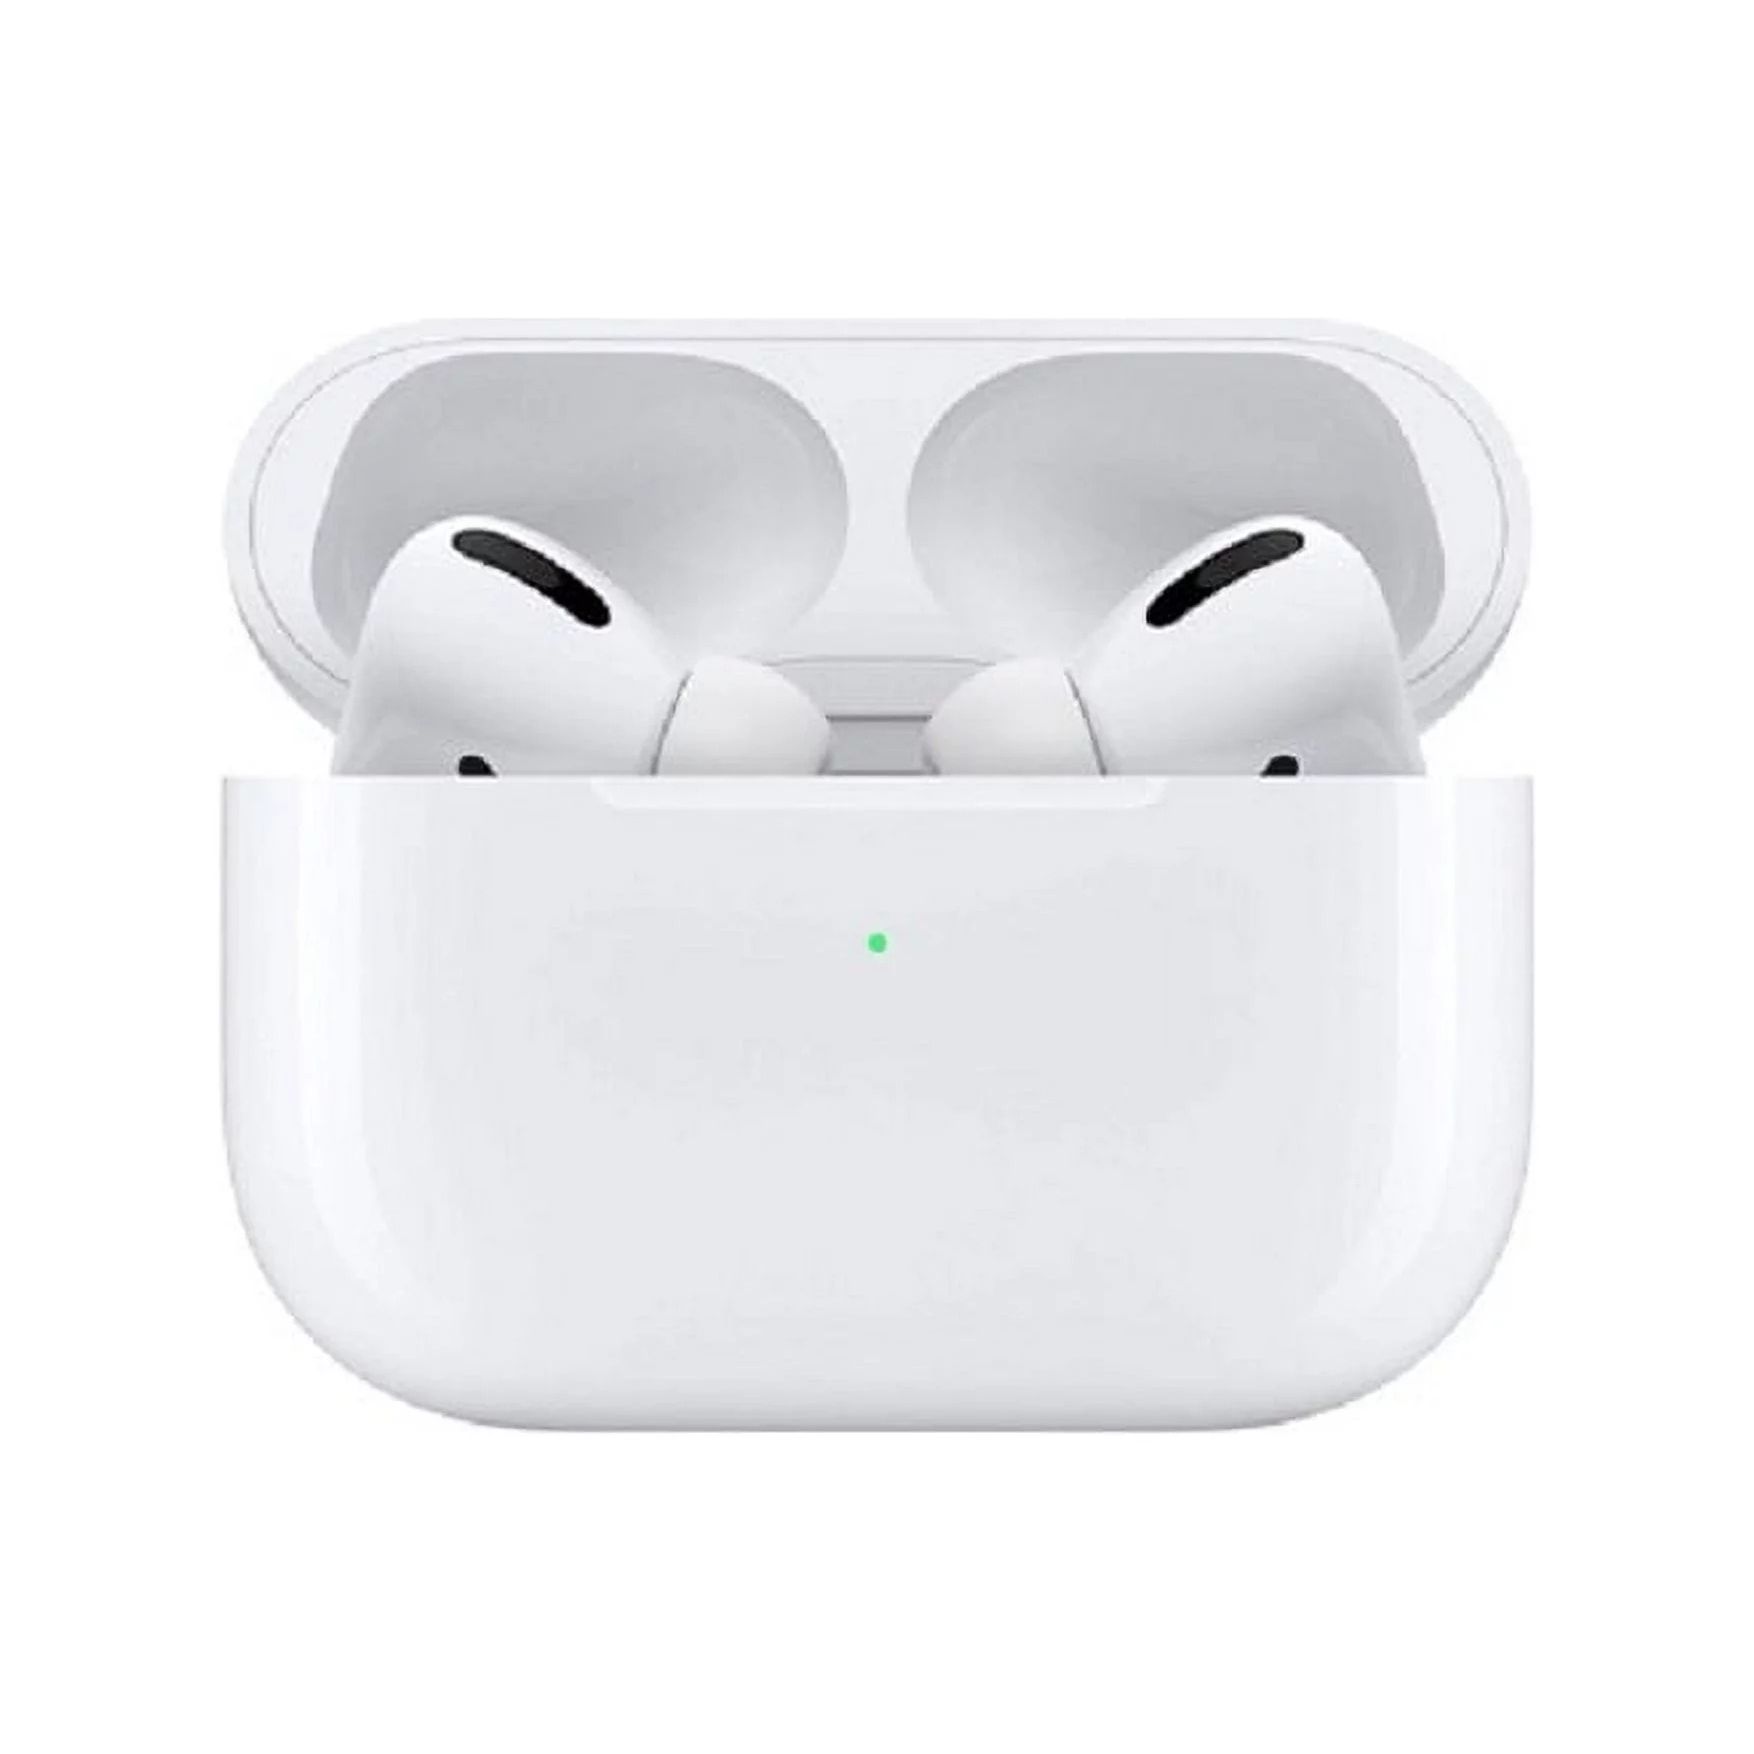 HEADSET BLUETOOTH AIR PODS PRO TWS HIGH QUALITY- MWP22AM/A ضغط, Smartphones & Tab Headsets